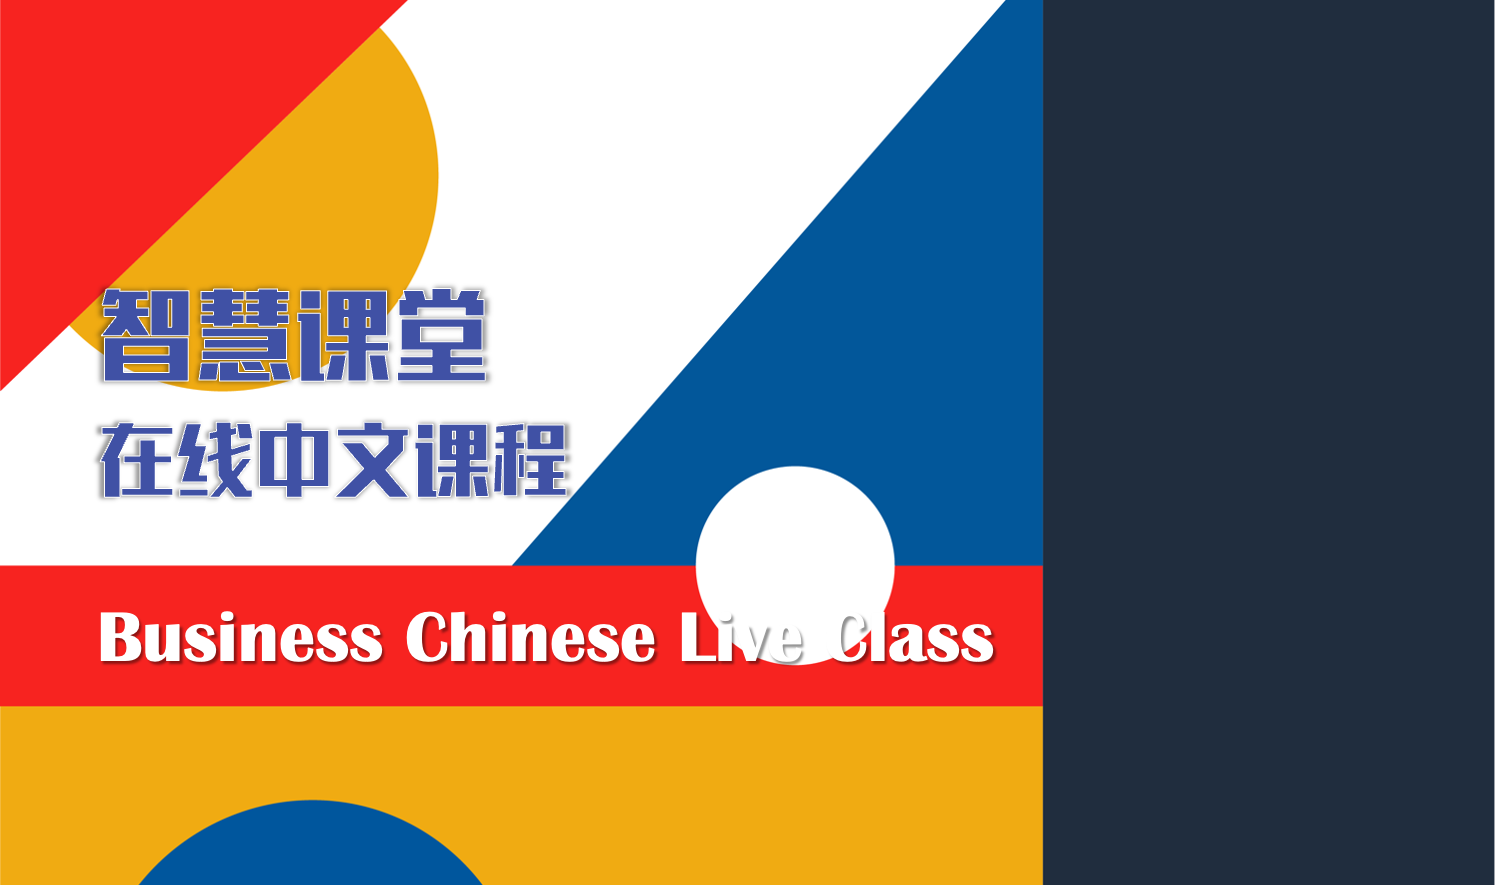 Business Chinese Live Class